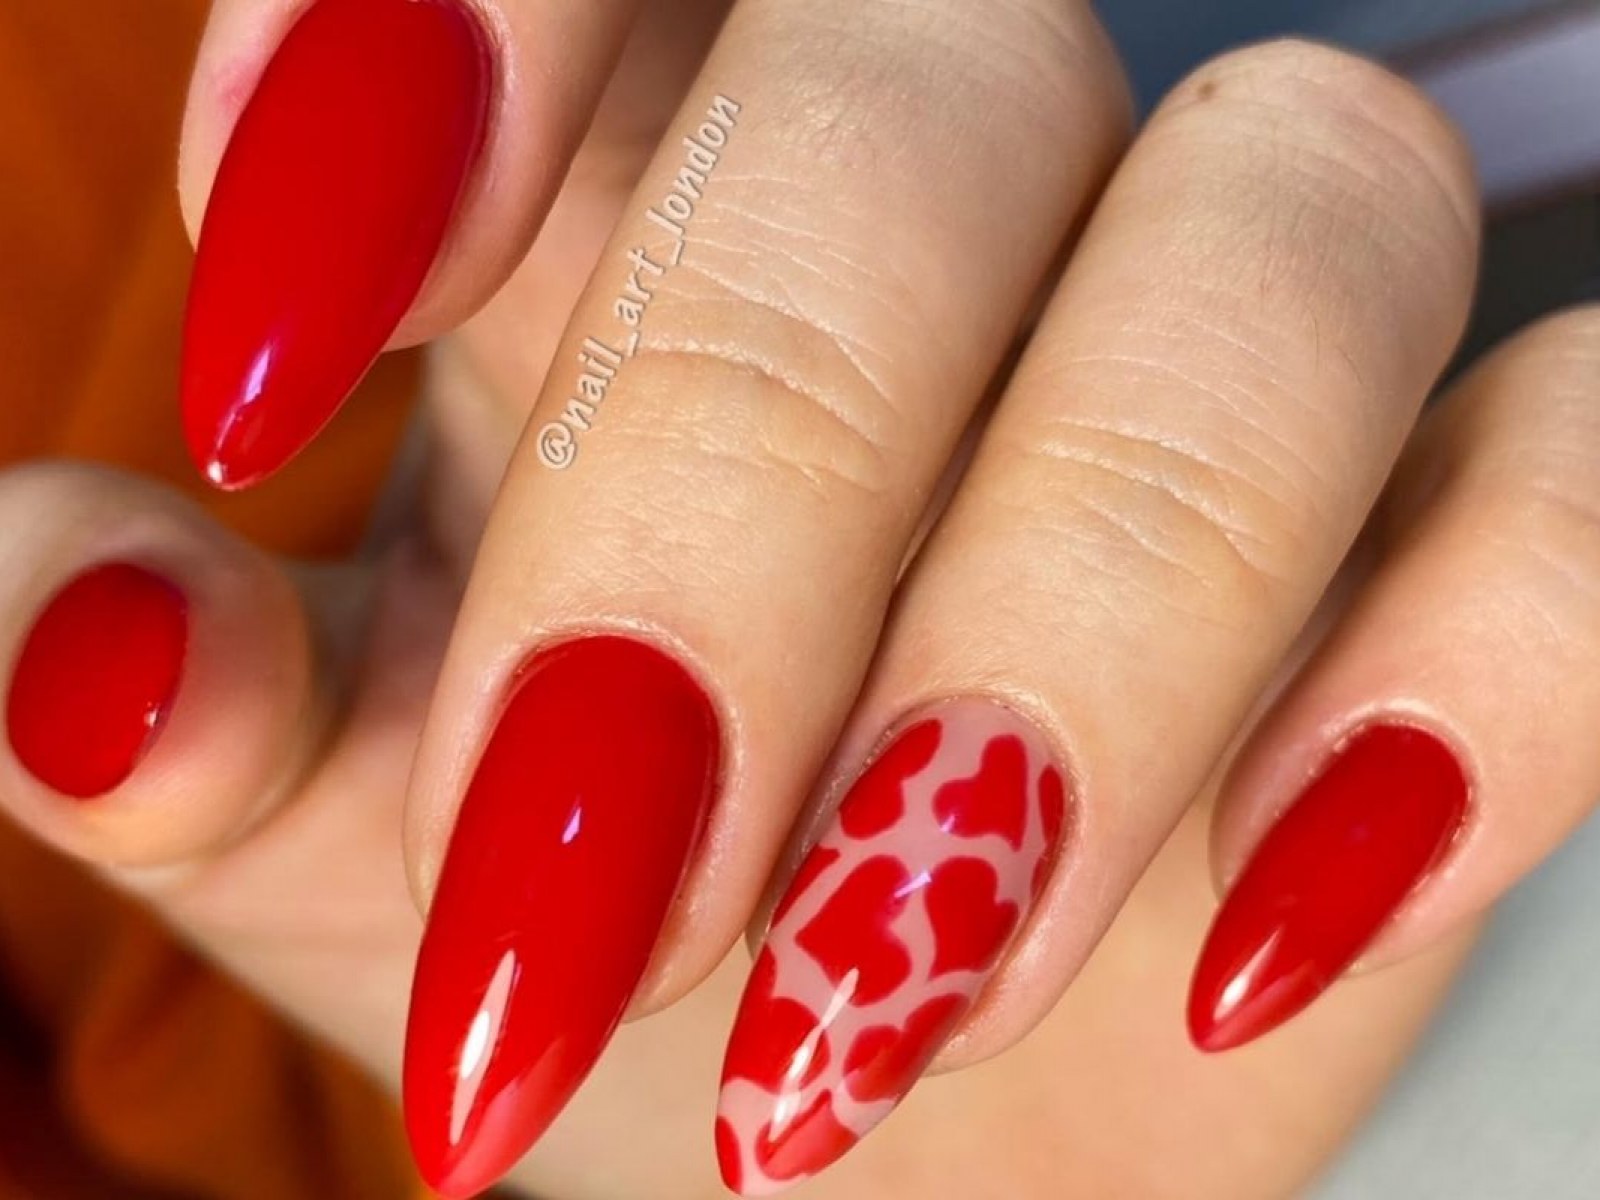 Red 1 70+ Most Popular Gel Nail Colors - 49